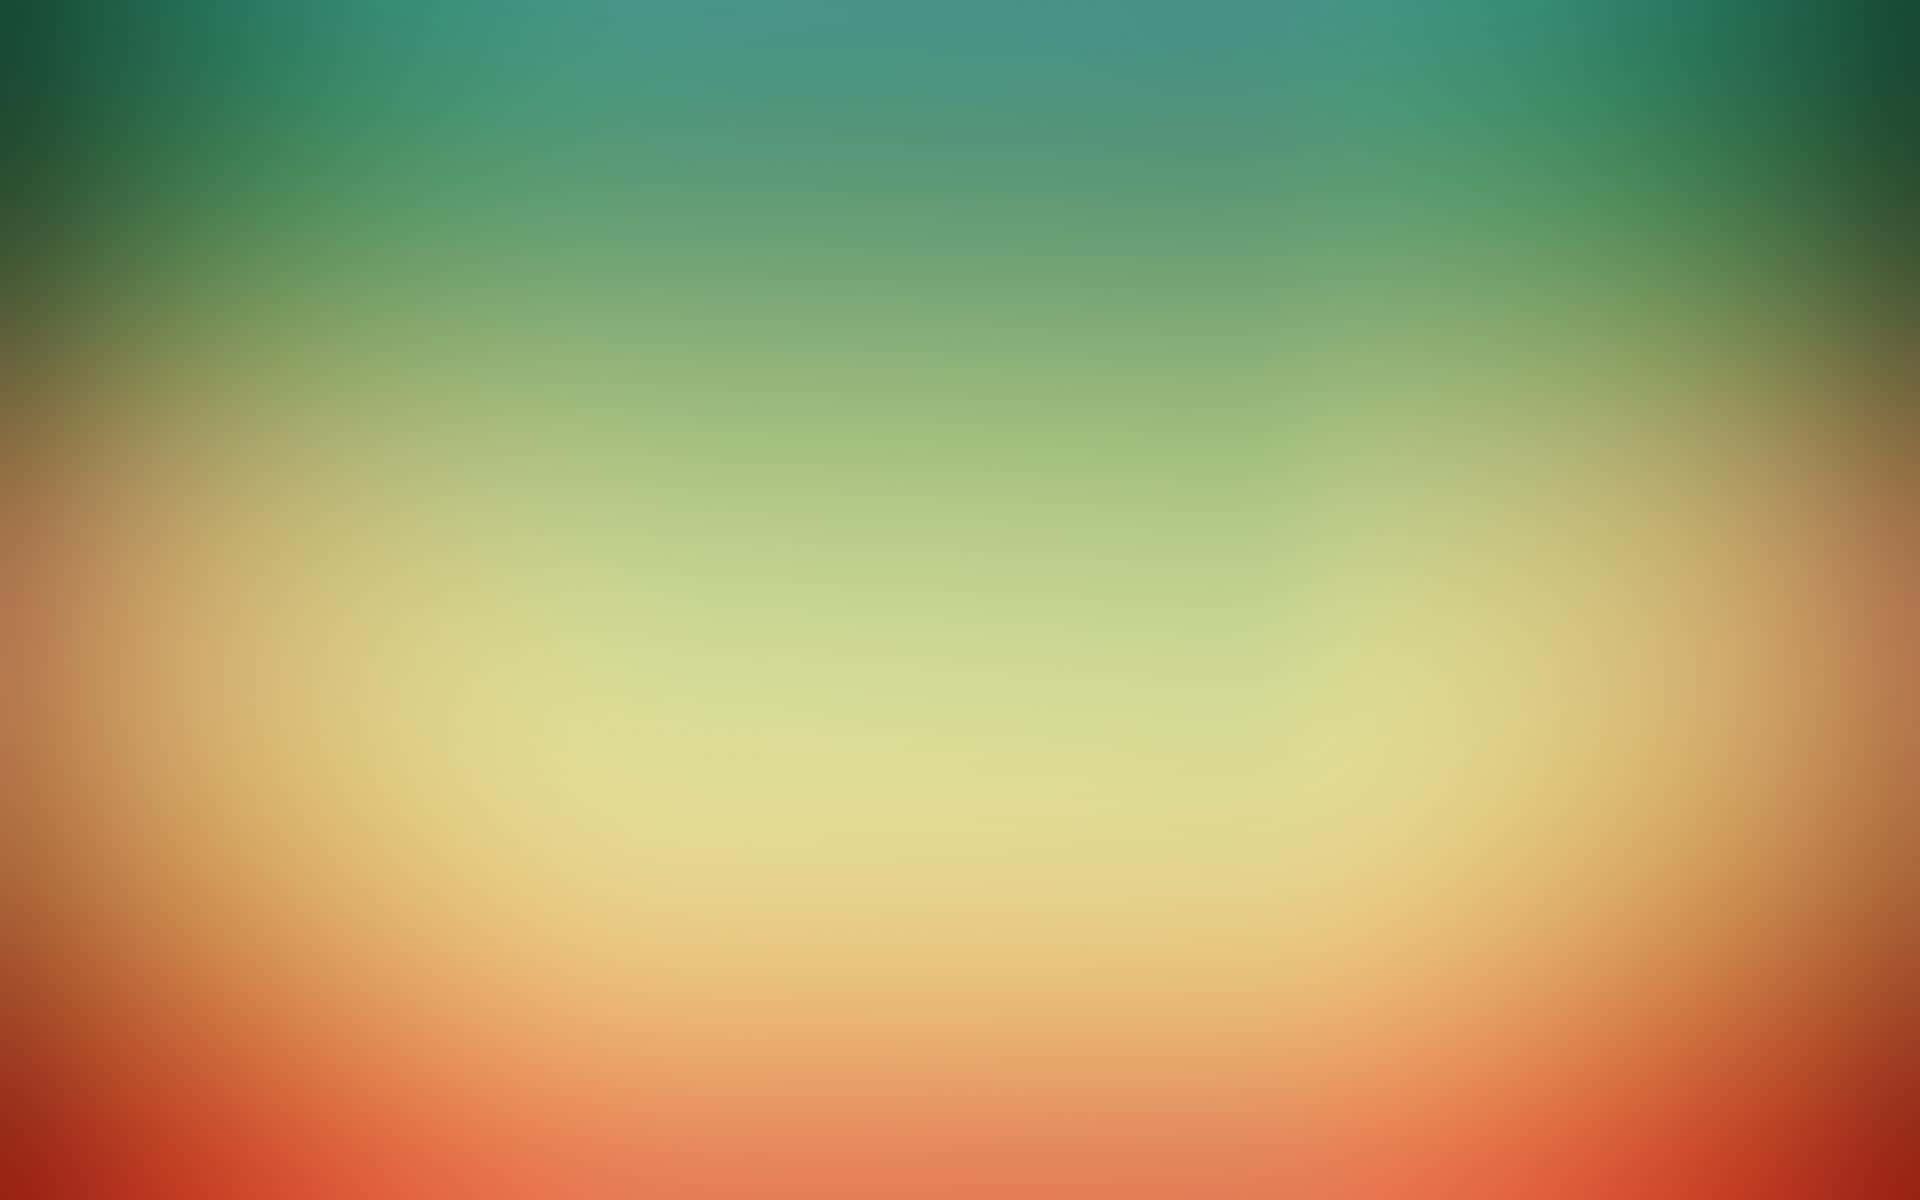 Green And Orange Ombre Gradient Background